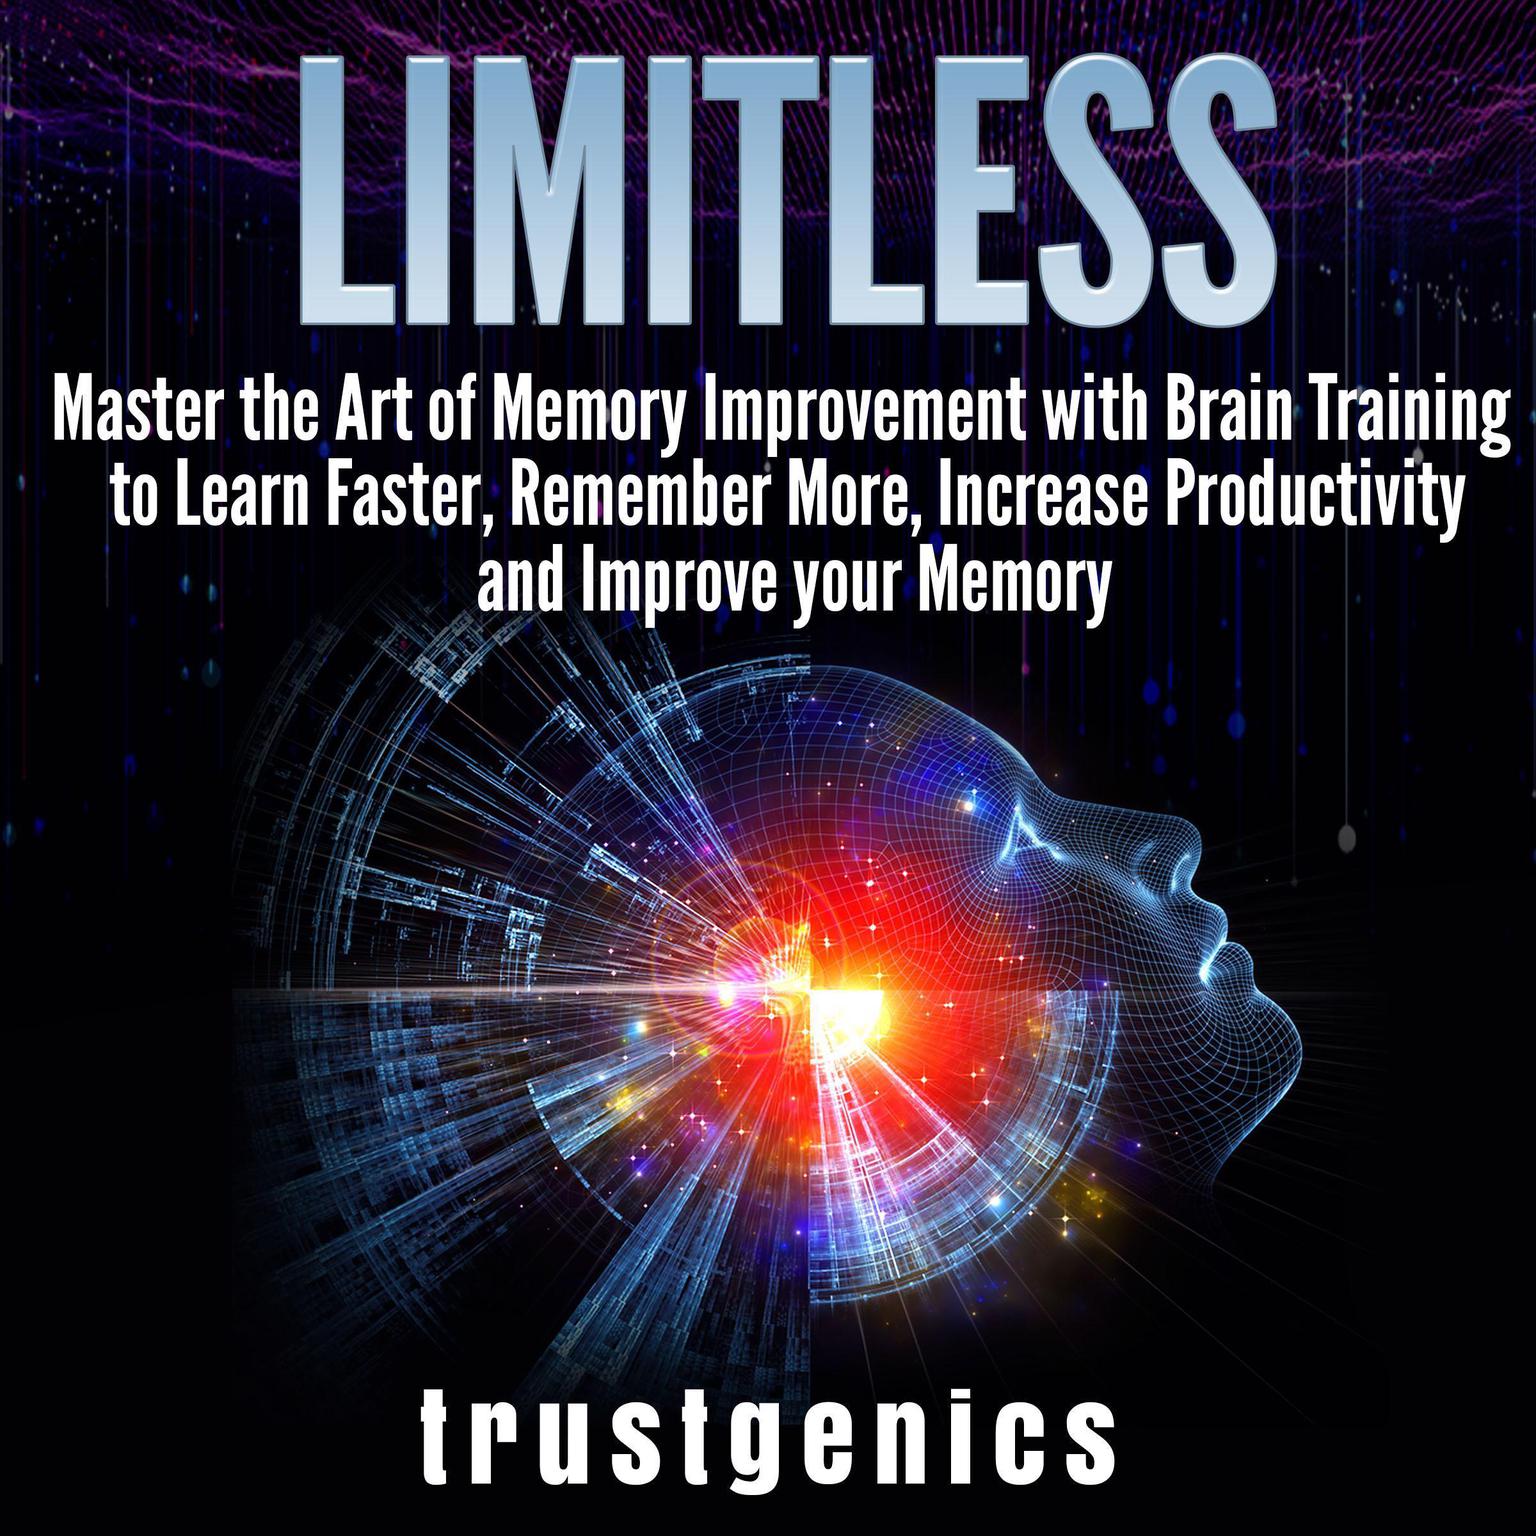 Limitless: Master the Art of Memory Improvement with Brain Training to Learn Faster, Remember More, Increase Productivity and Improve Memory Audiobook, by Trust Genics